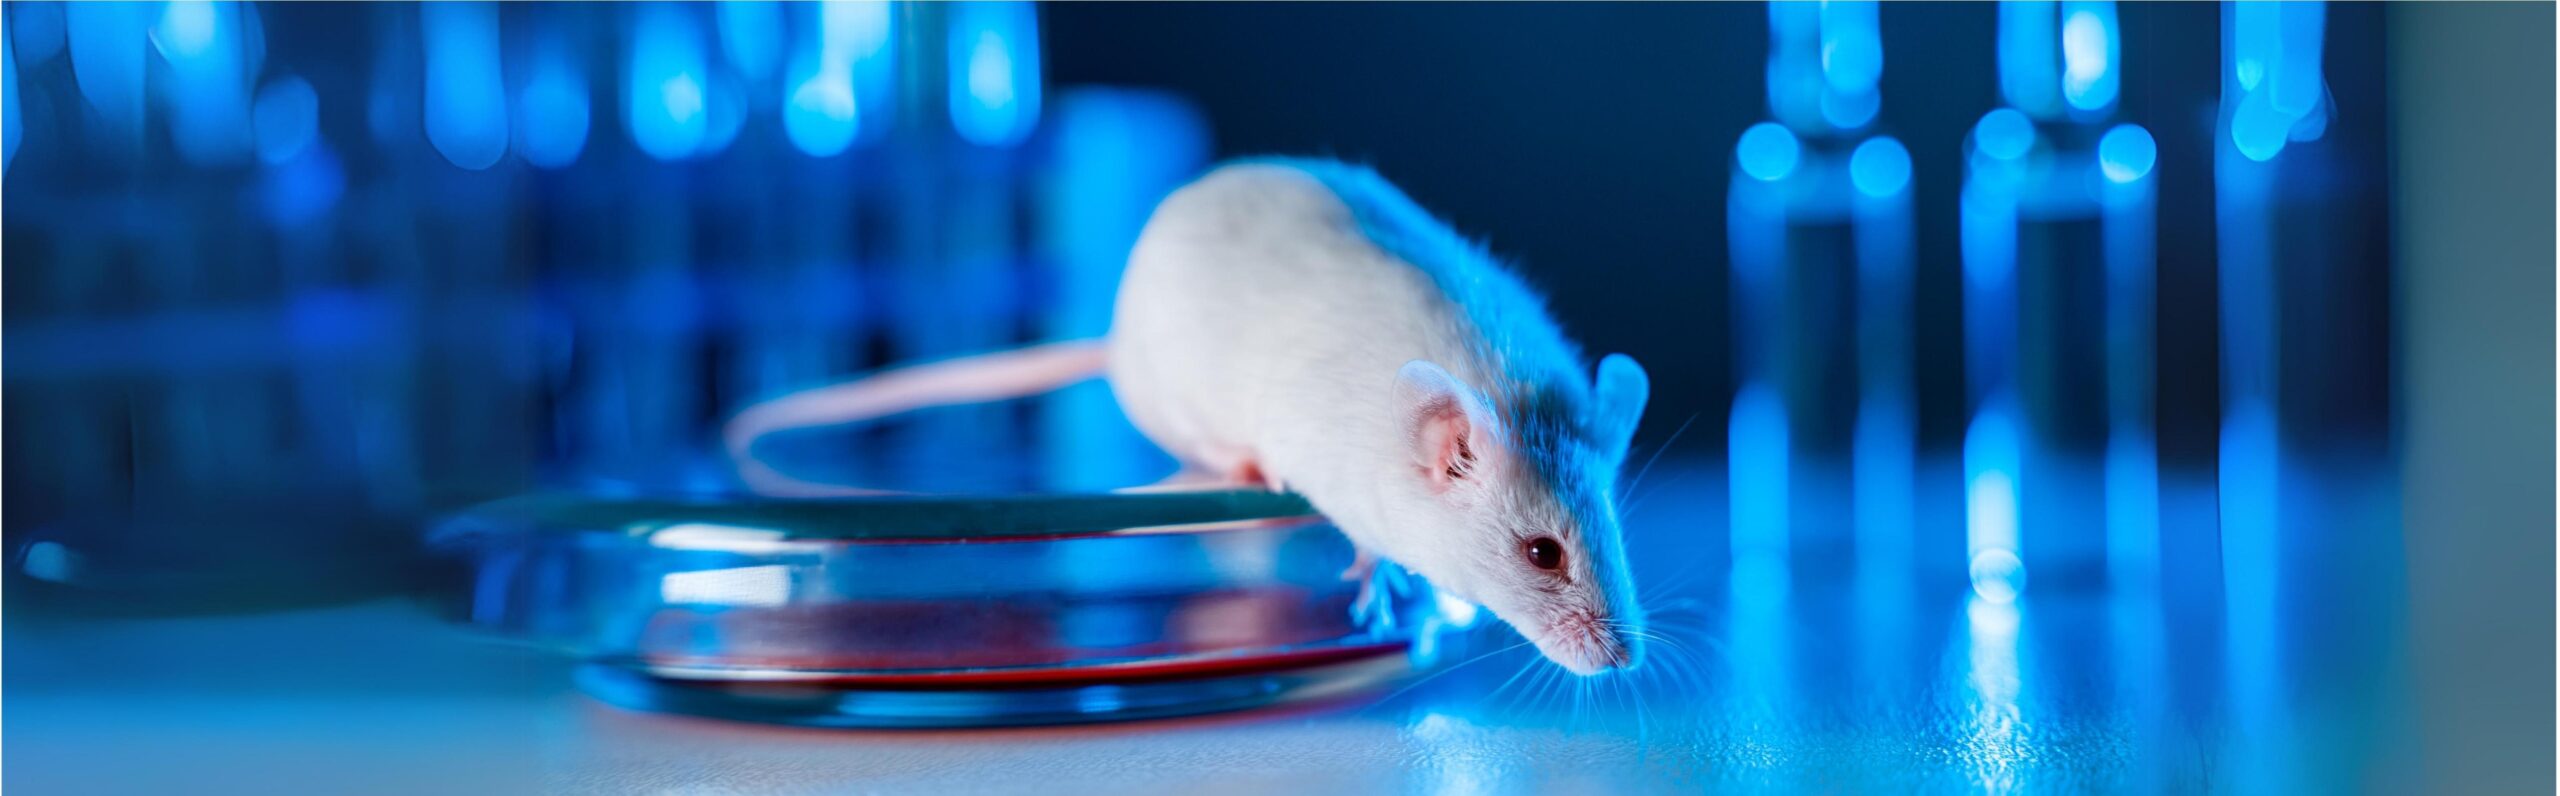 Animal testing in preclinical trials of drug development